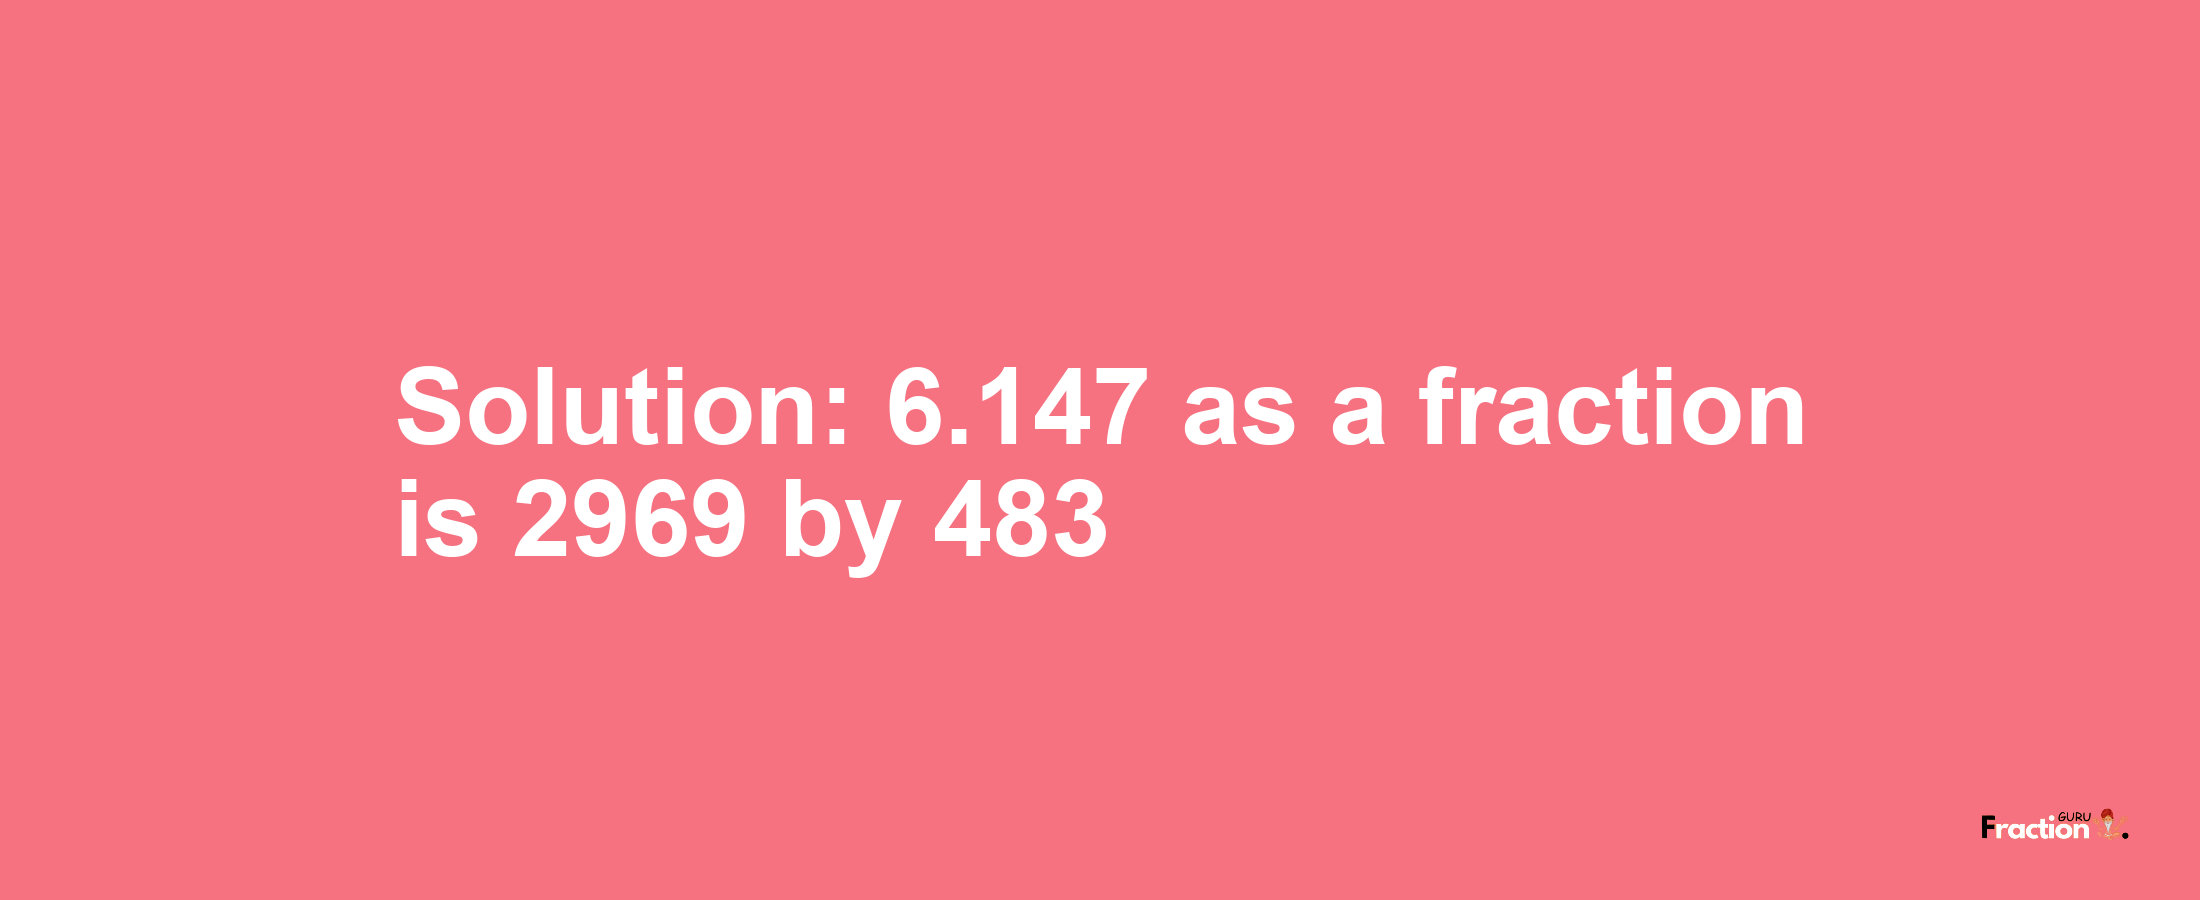 Solution:6.147 as a fraction is 2969/483